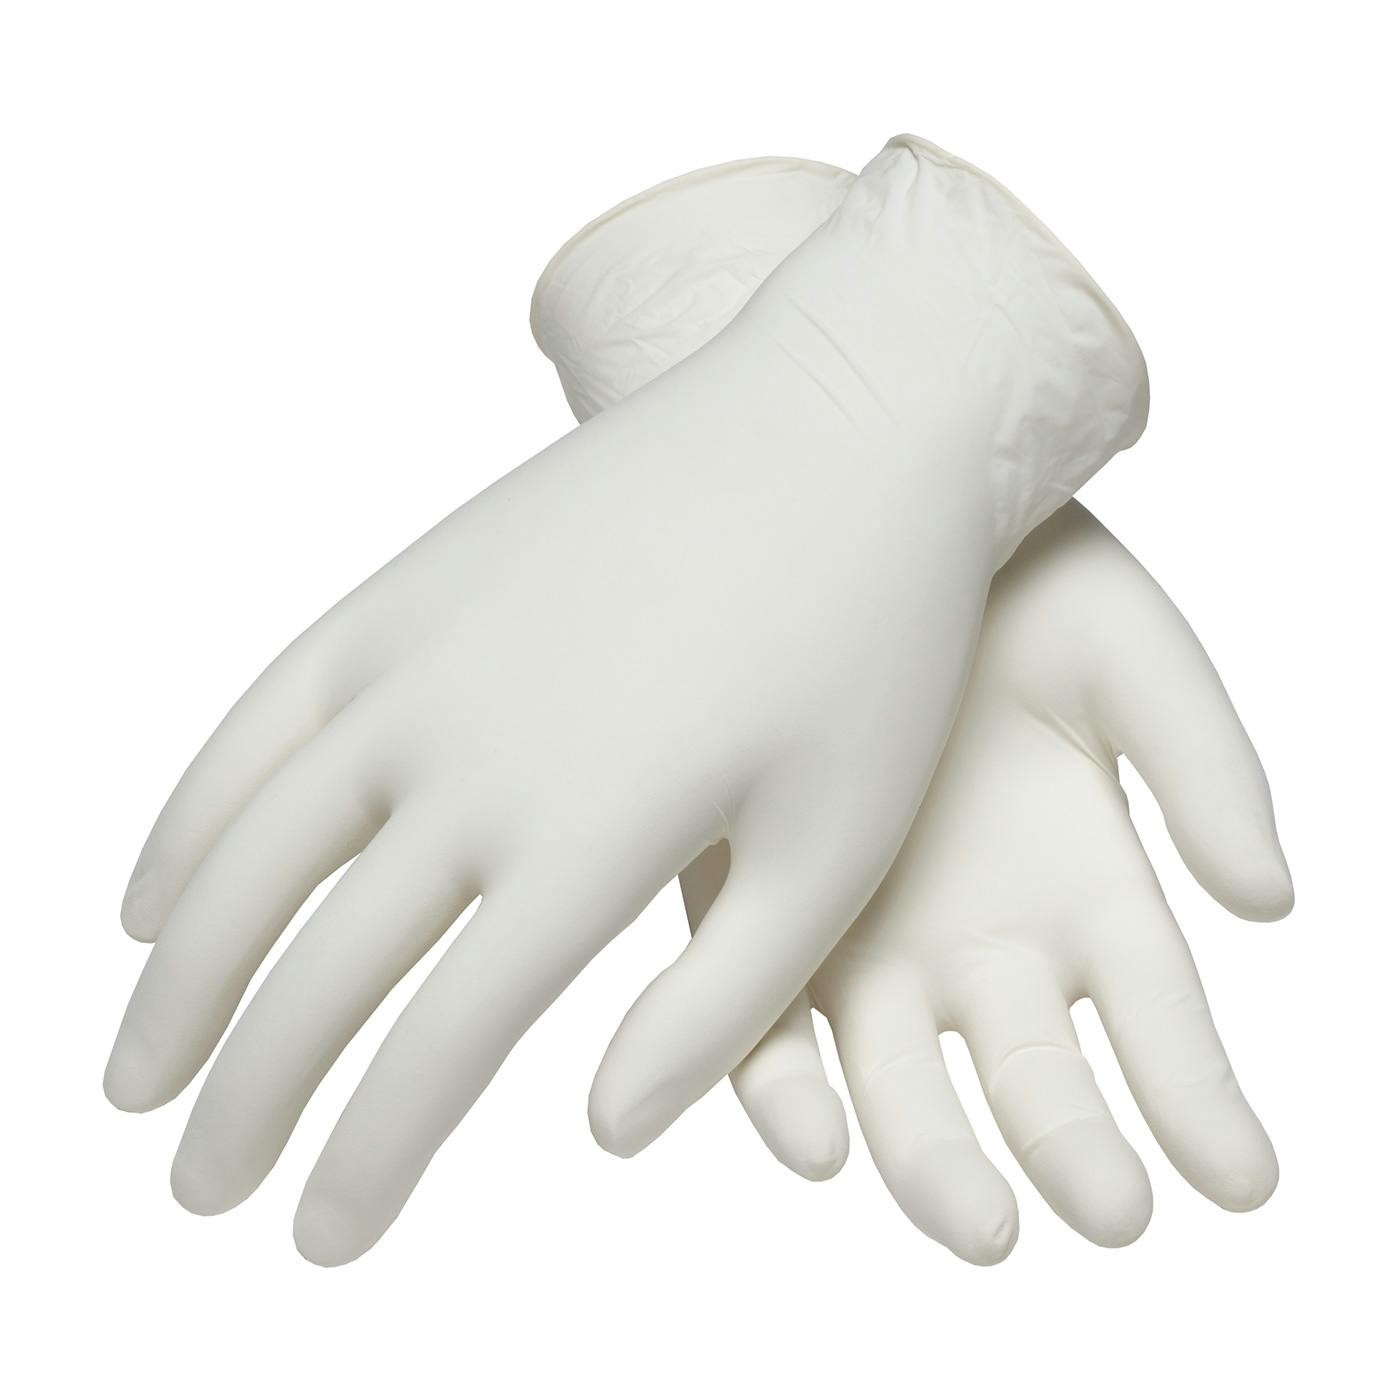 Ambi-dex® Food Grade Disposable Non-Latex Synthetic Glove, Powder-Free with Smooth Grip - 4 Mil (64-346PF)